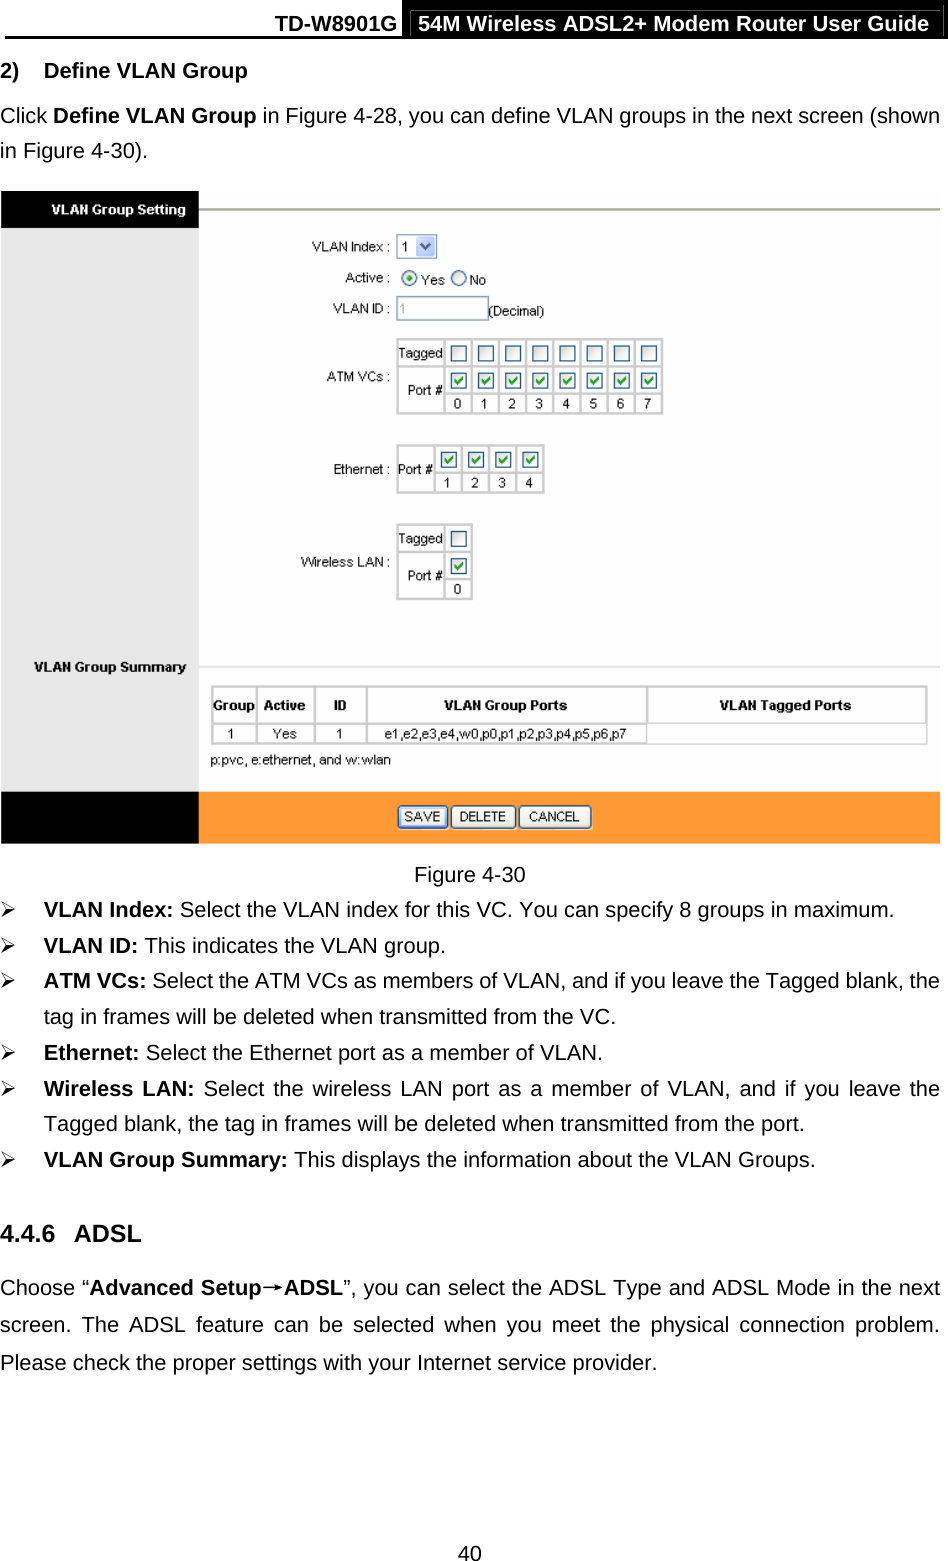 TD-W8901G 54M Wireless ADSL2+ Modem Router User Guide  402)  Define VLAN Group   Click Define VLAN Group in Figure 4-28, you can define VLAN groups in the next screen (shown in Figure 4-30).  Figure 4-30 ¾ VLAN Index: Select the VLAN index for this VC. You can specify 8 groups in maximum. ¾ VLAN ID: This indicates the VLAN group. ¾ ATM VCs: Select the ATM VCs as members of VLAN, and if you leave the Tagged blank, the tag in frames will be deleted when transmitted from the VC. ¾ Ethernet: Select the Ethernet port as a member of VLAN. ¾ Wireless LAN: Select the wireless LAN port as a member of VLAN, and if you leave the Tagged blank, the tag in frames will be deleted when transmitted from the port. ¾ VLAN Group Summary: This displays the information about the VLAN Groups. 4.4.6  ADSL Choose “Advanced Setup→ADSL”, you can select the ADSL Type and ADSL Mode in the next screen. The ADSL feature can be selected when you meet the physical connection problem. Please check the proper settings with your Internet service provider. 